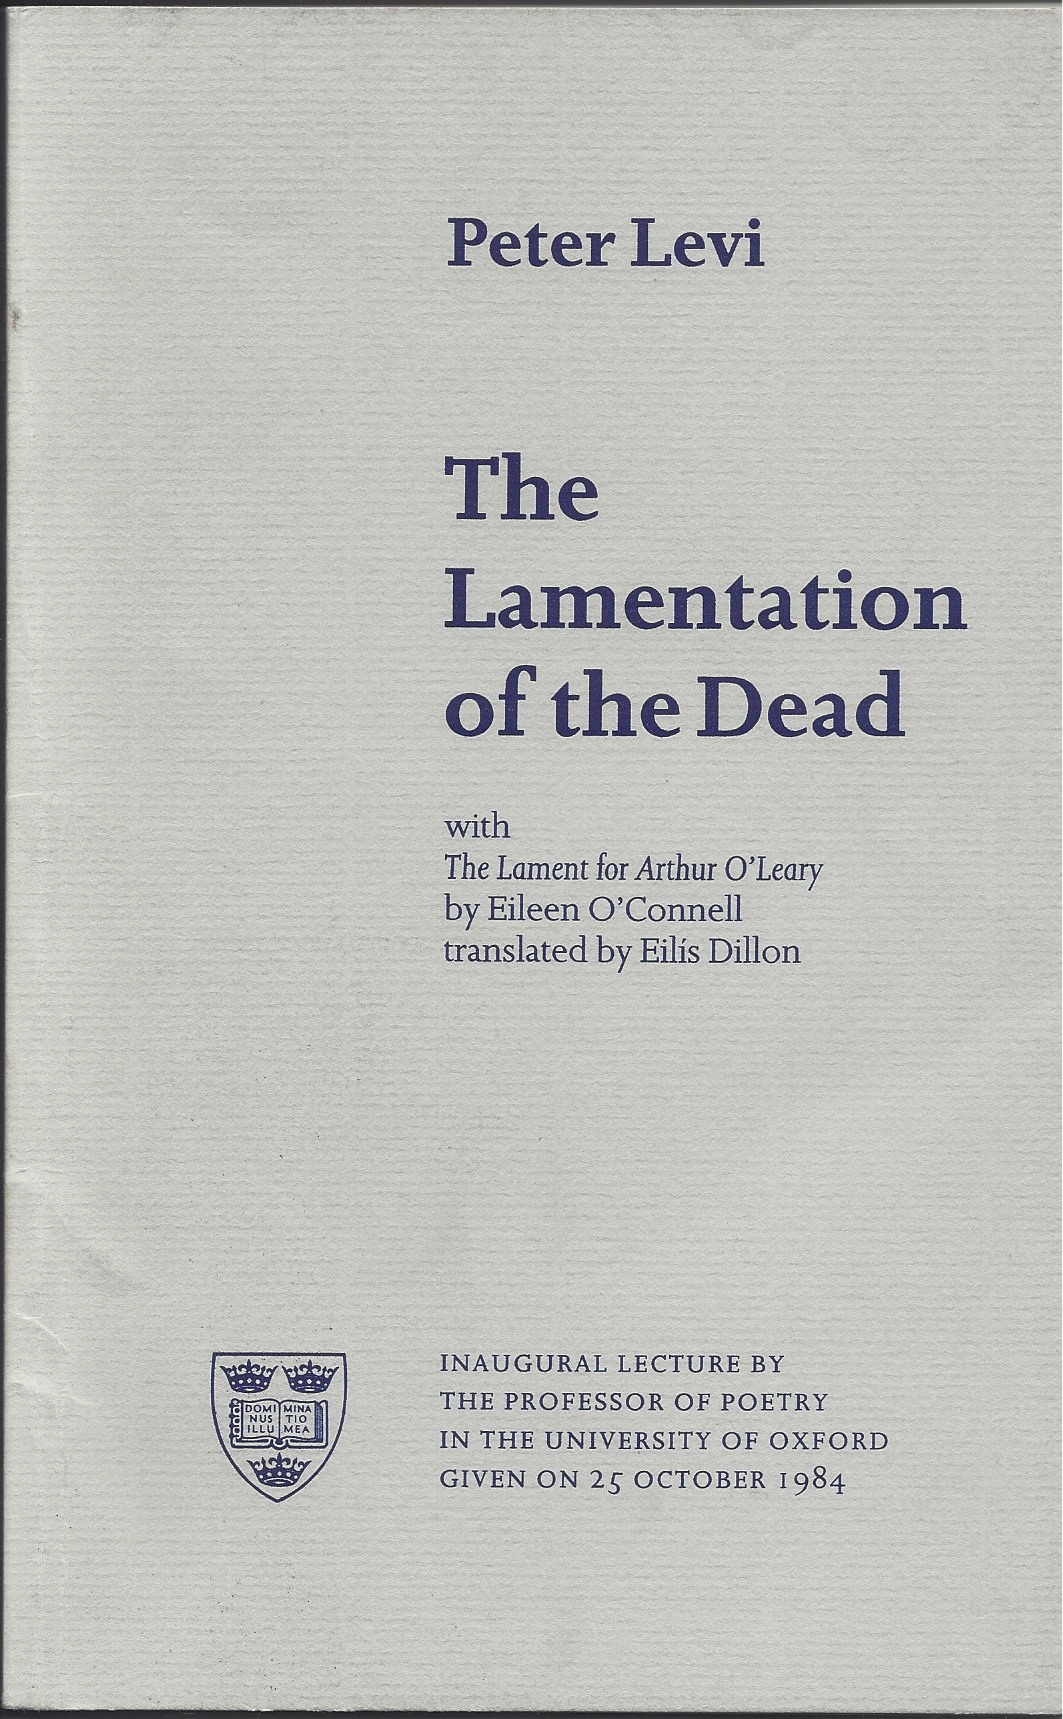 The Lamentation of the Dead